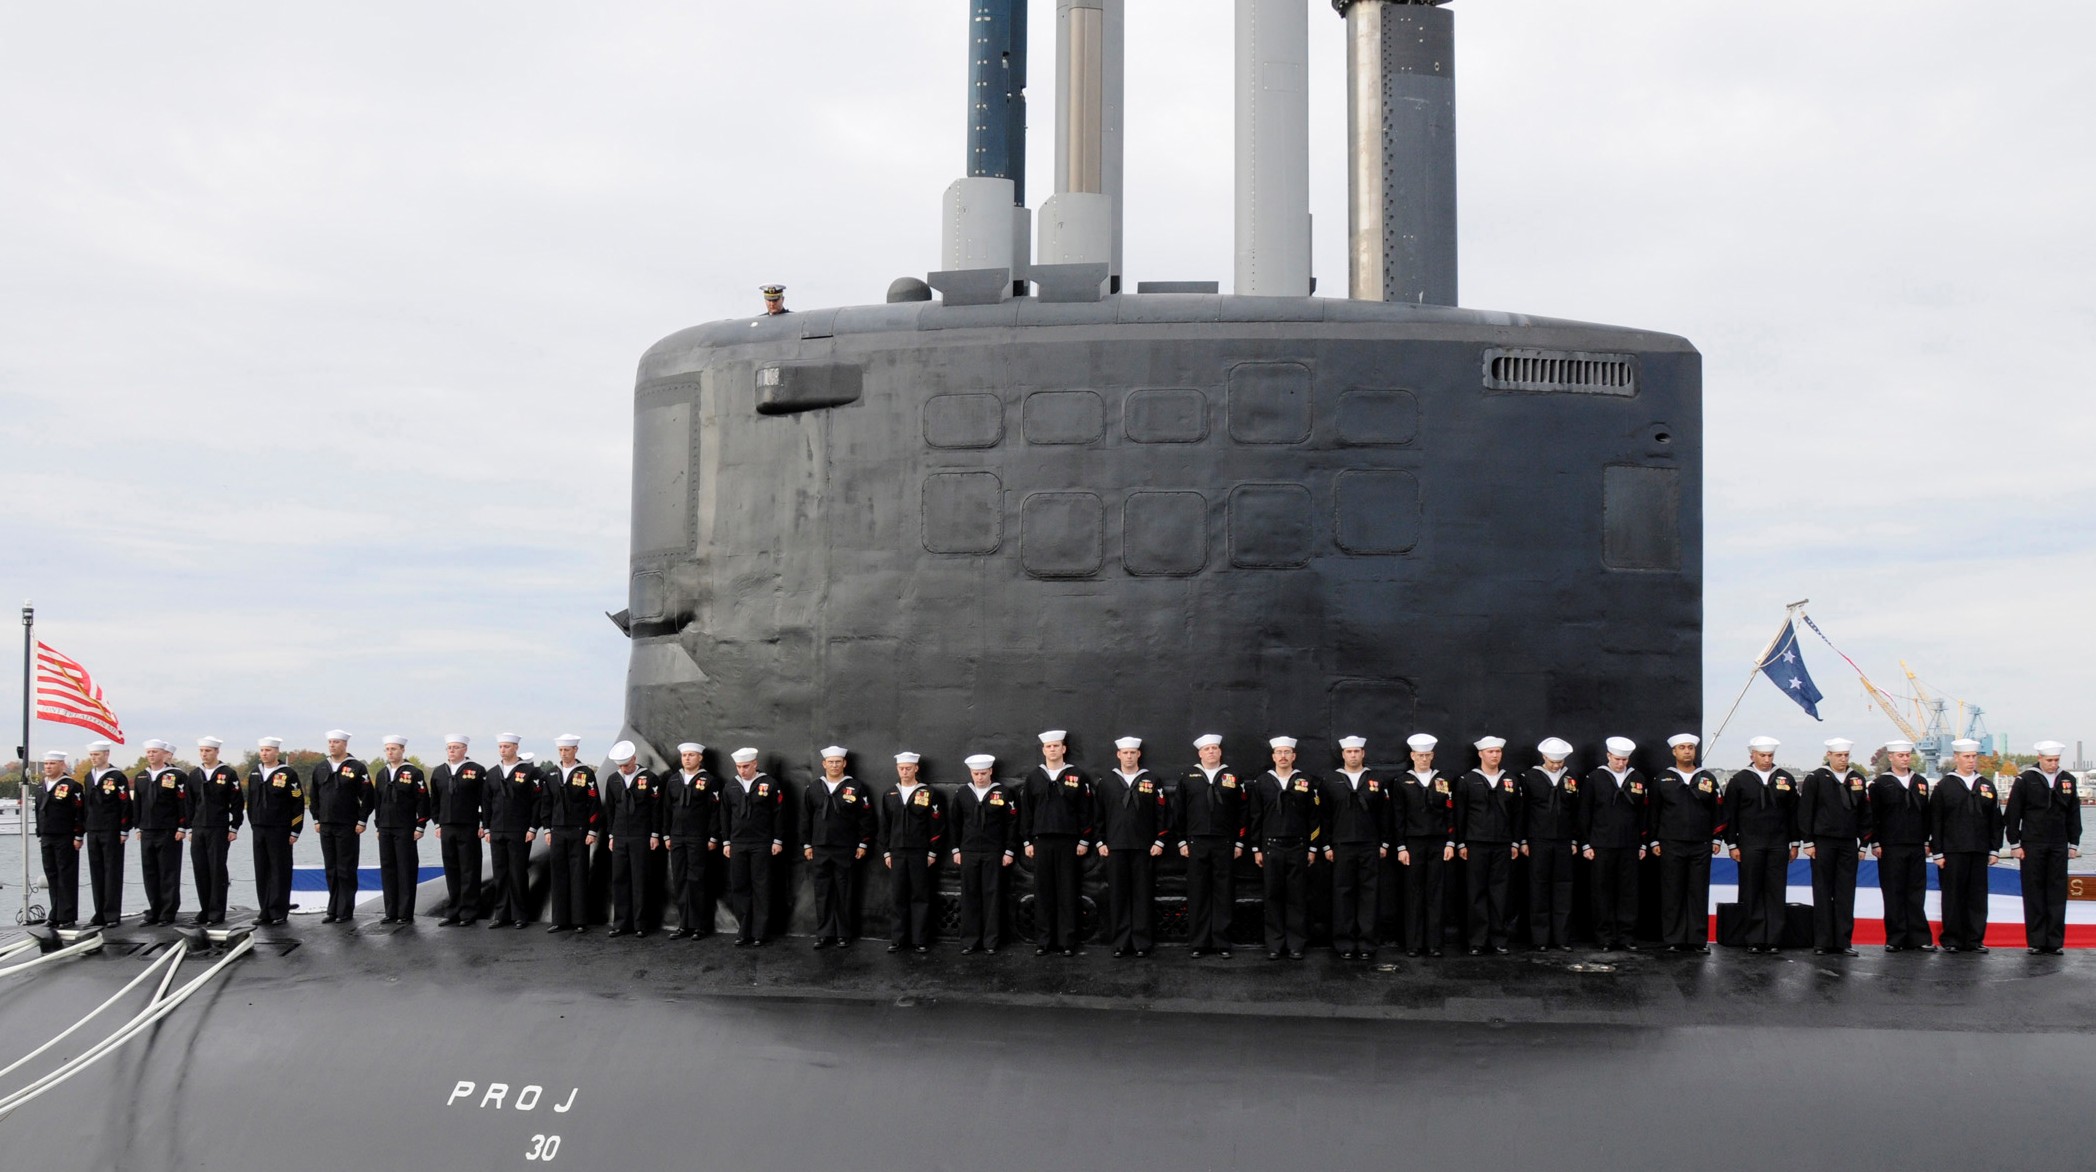 ssn-778 uss new hampshire virginia class attack submarine us navy 16 commissioning ceremony